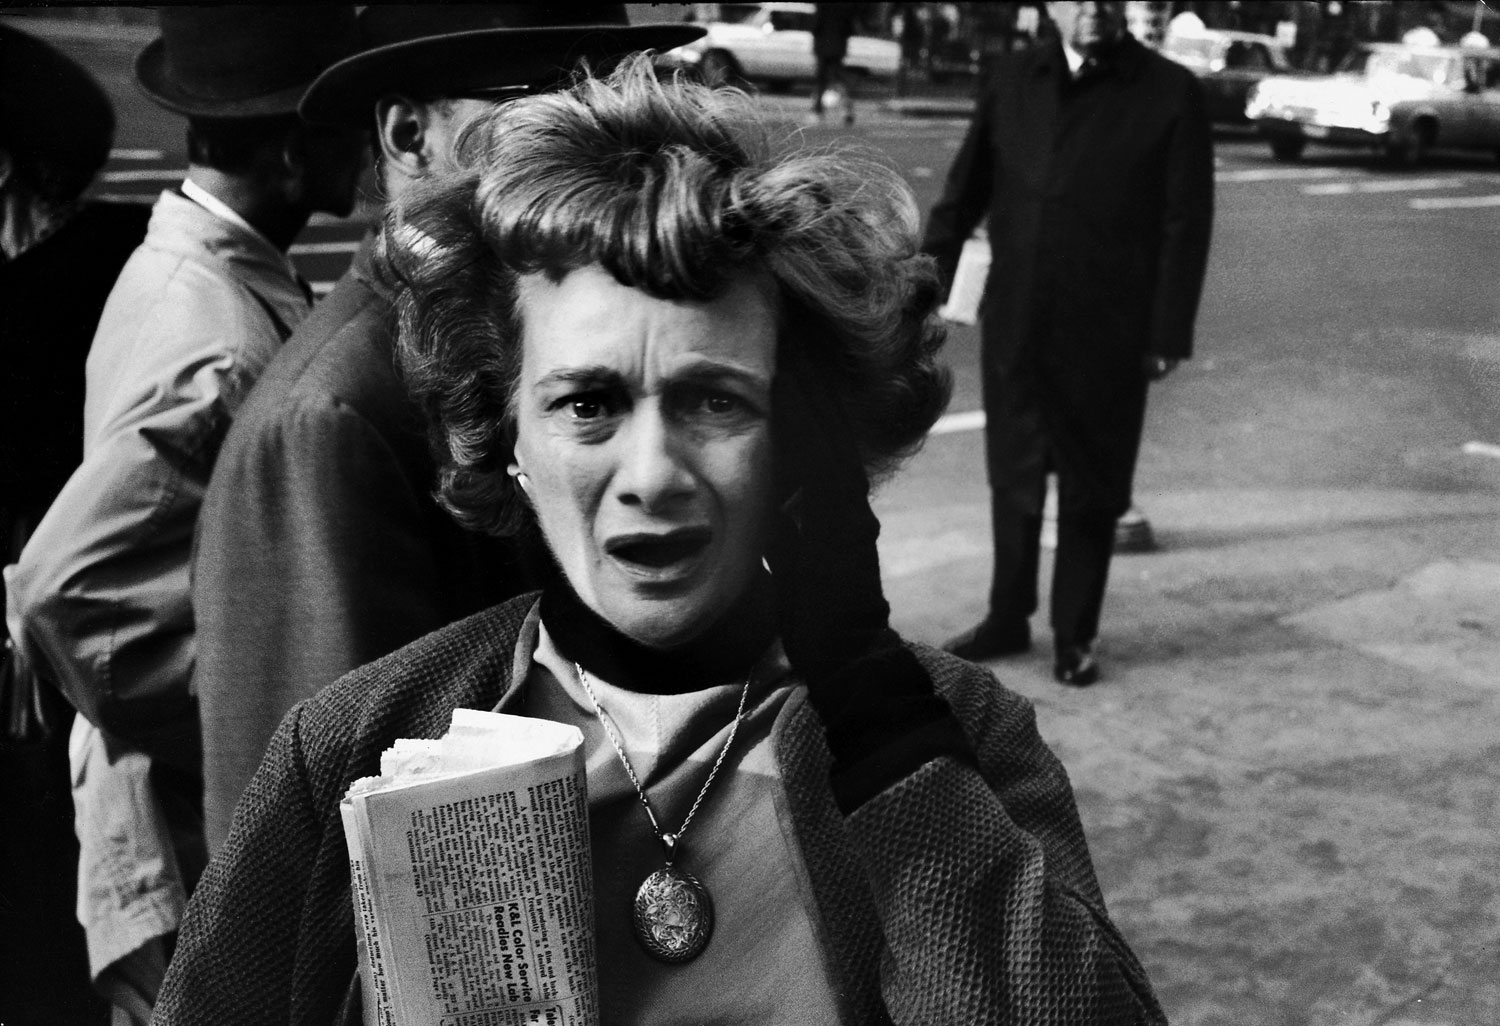 A woman in New York reacts to the news of John F. Kennedy's assassination, Nov. 22, 1963.